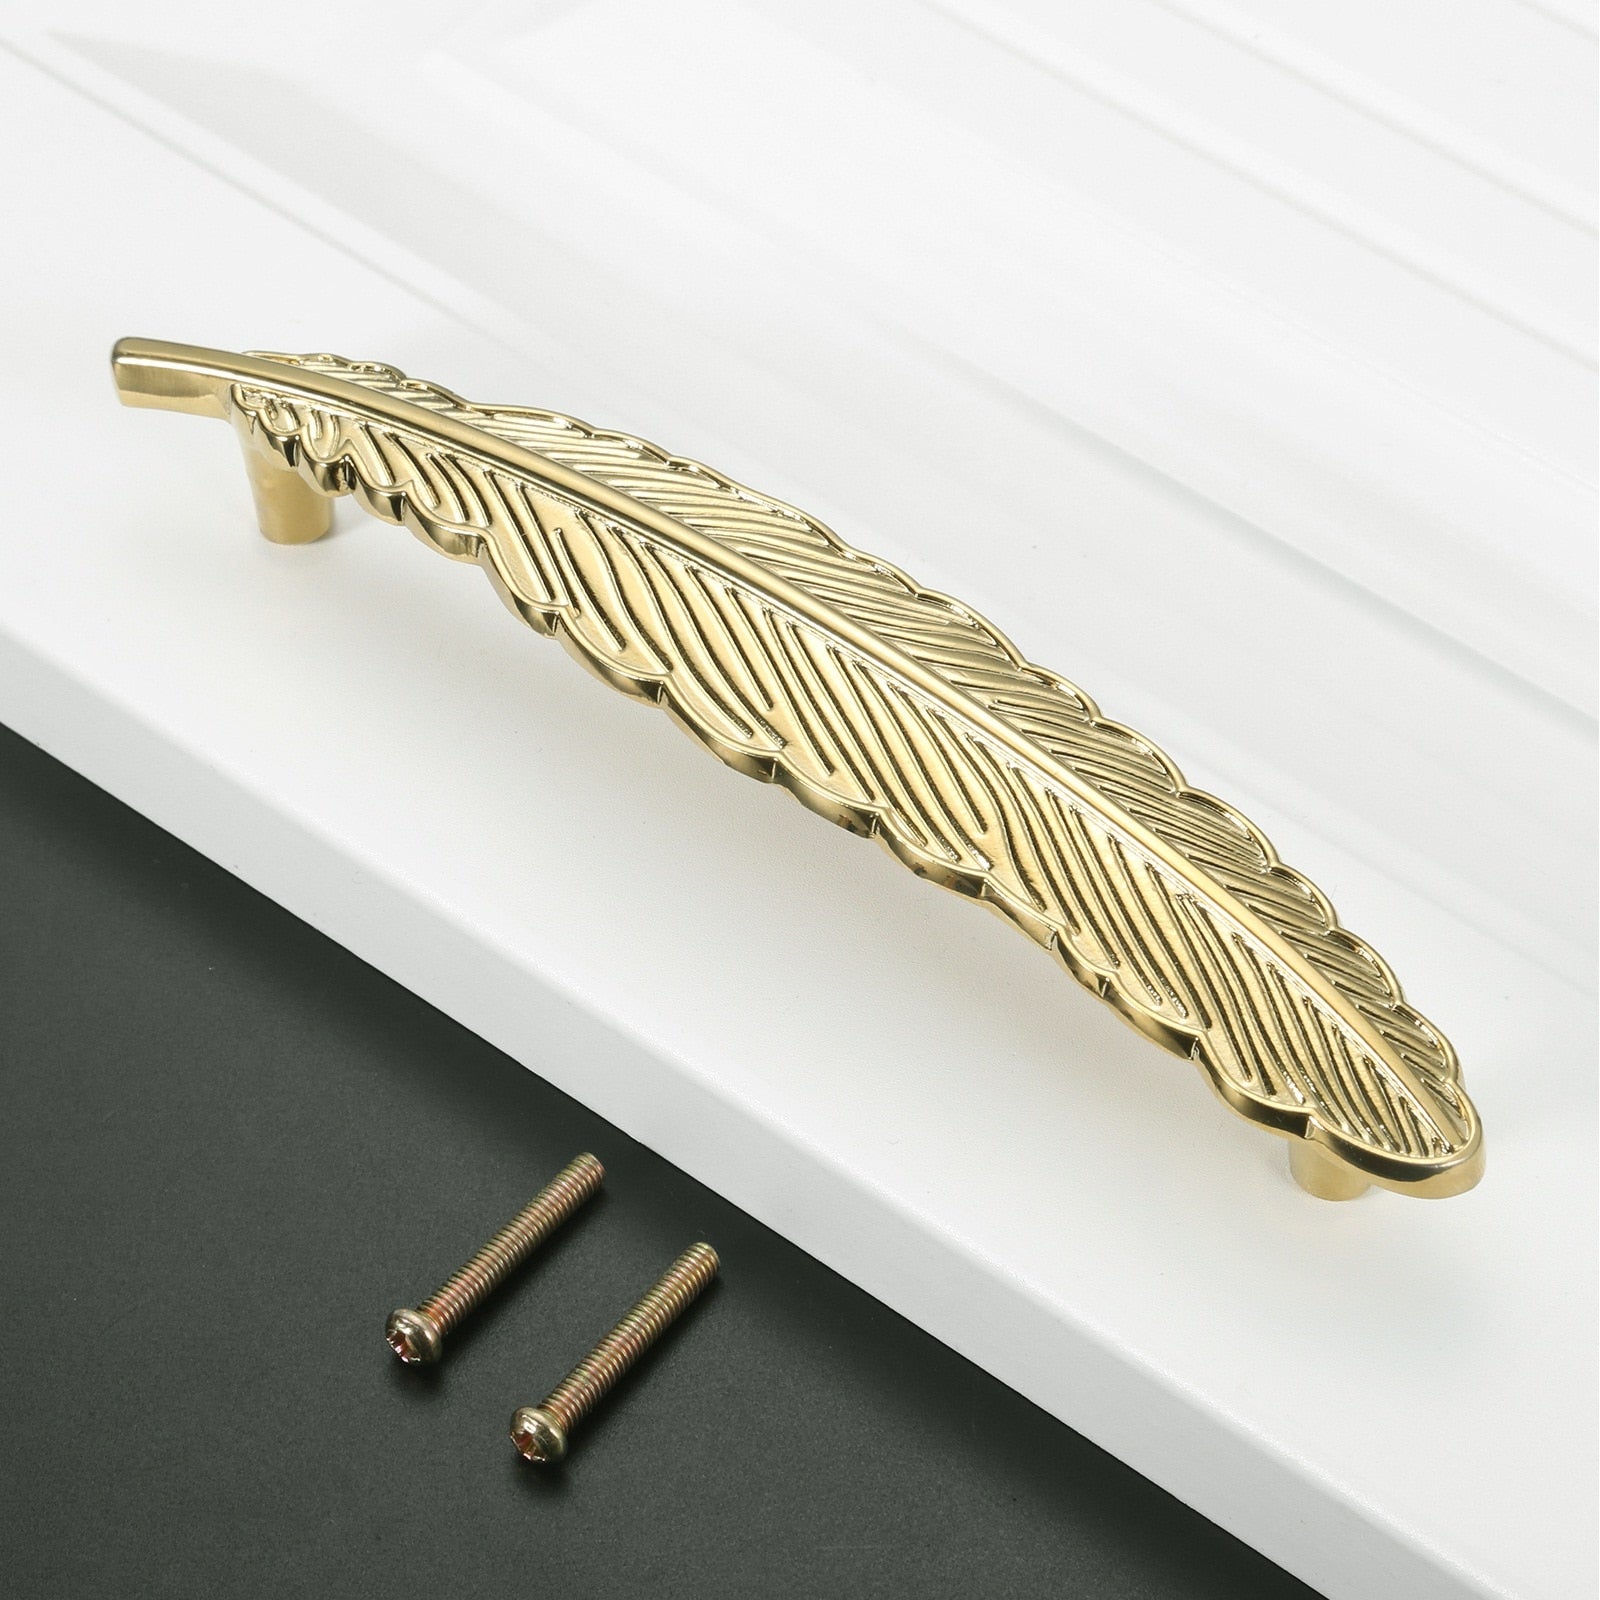 Brass Dragonfly and Feather Furniture Door Handles and Knobs